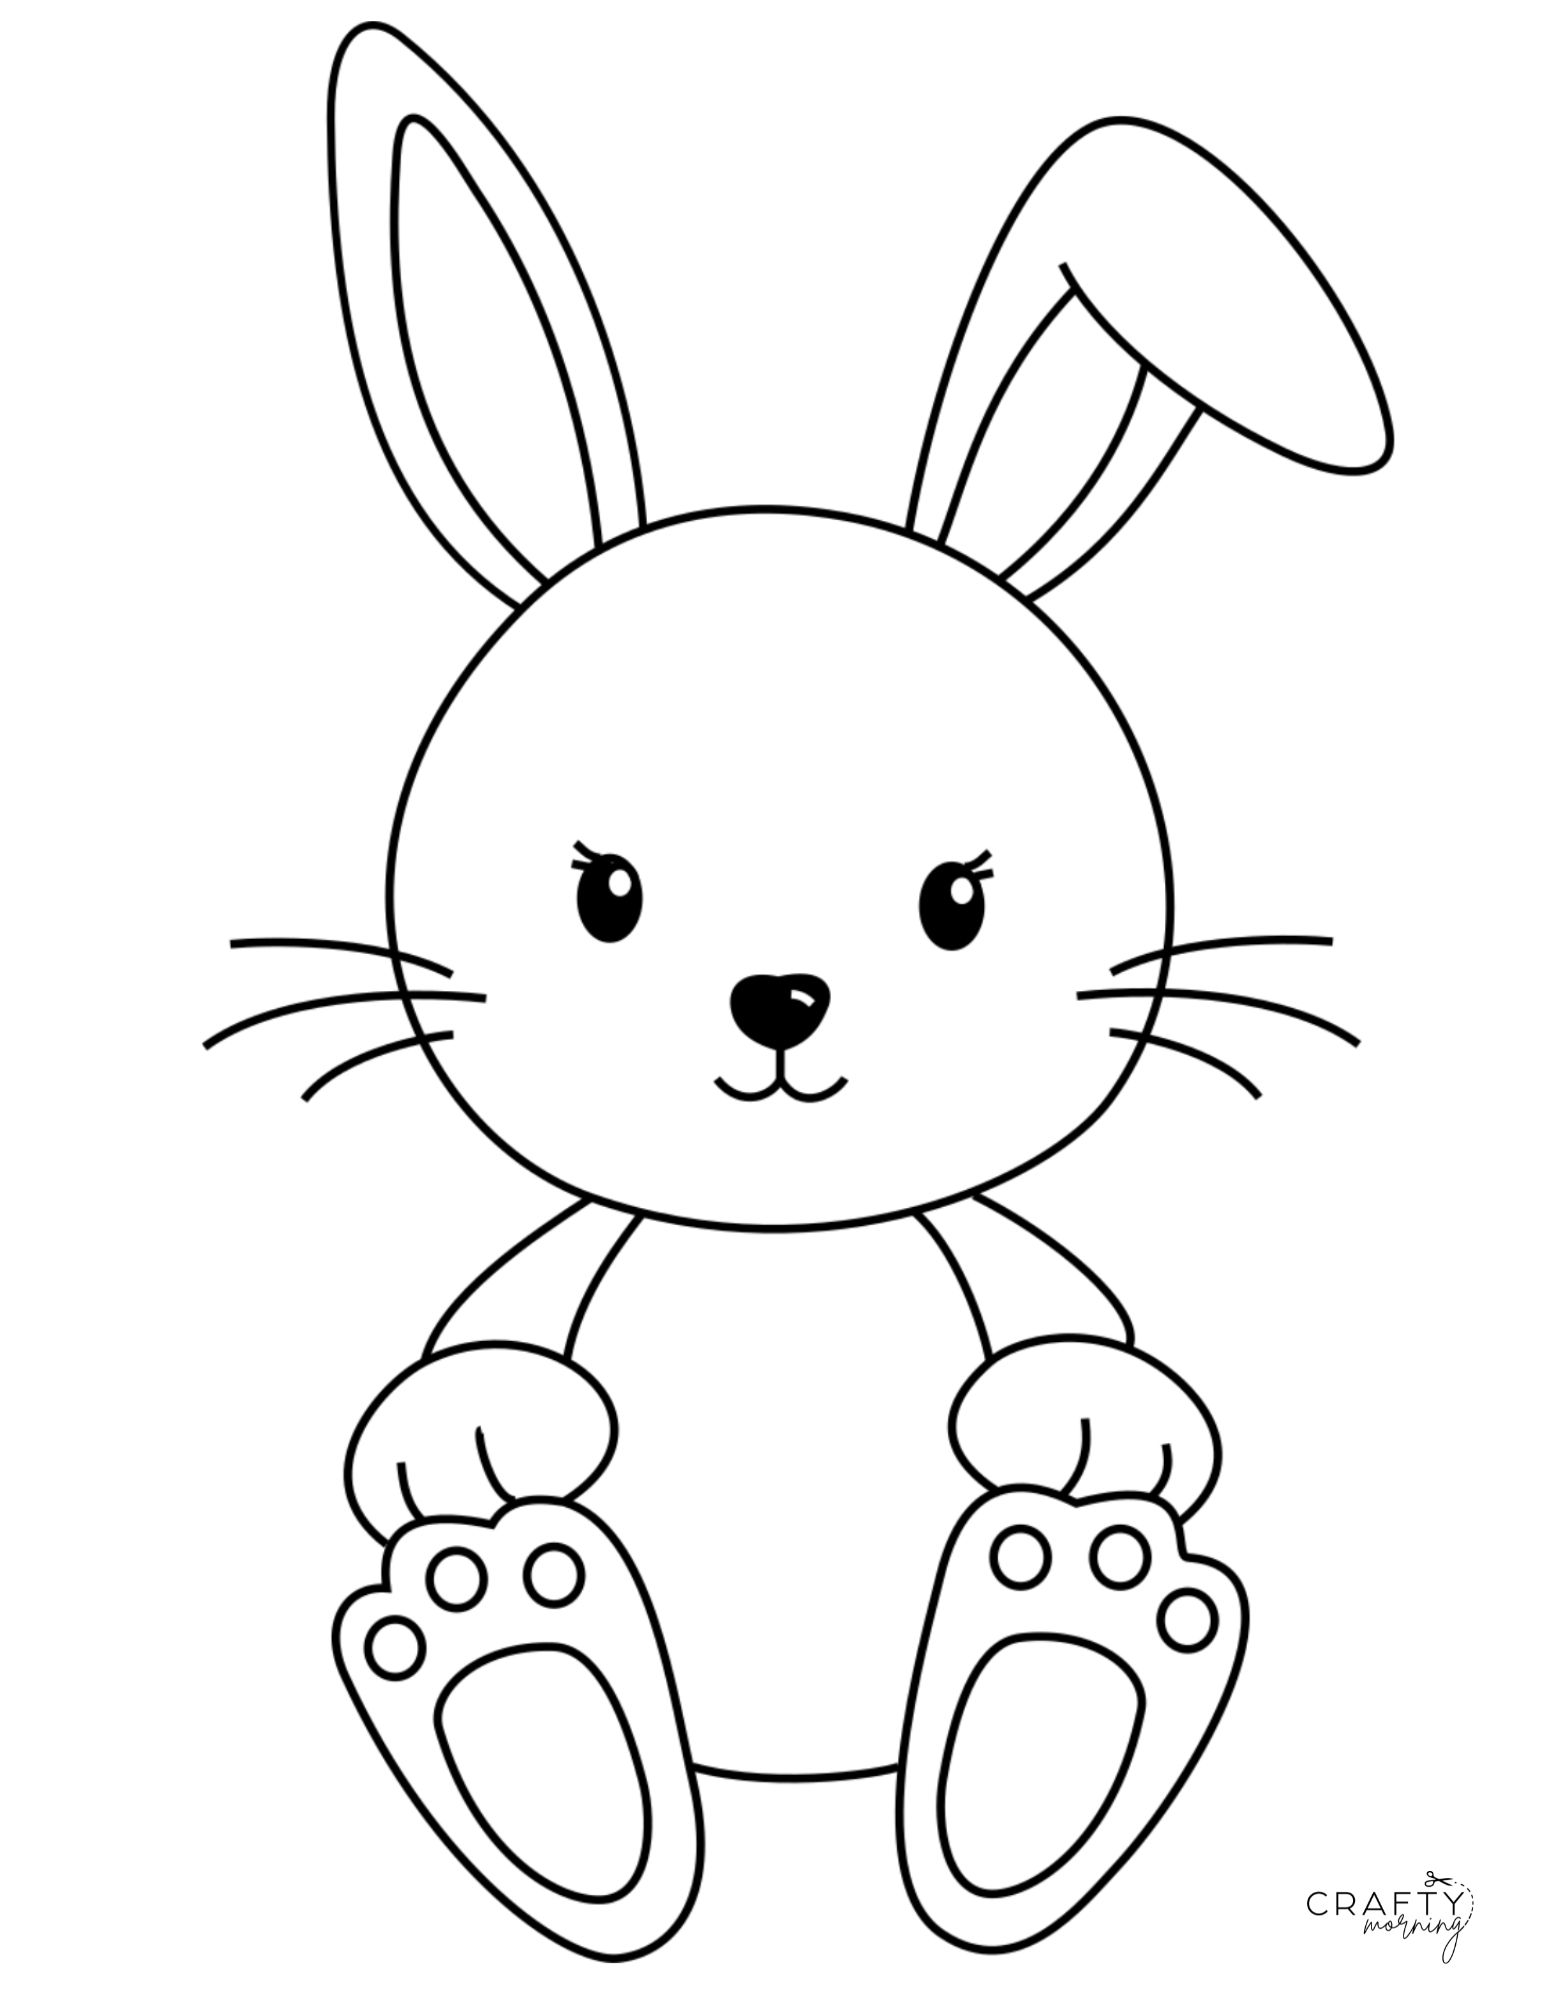 https://cdn.craftymorning.com/wp-content/uploads/2023/09/bunny-drawing-how-to-draw-step-by-step.jpg